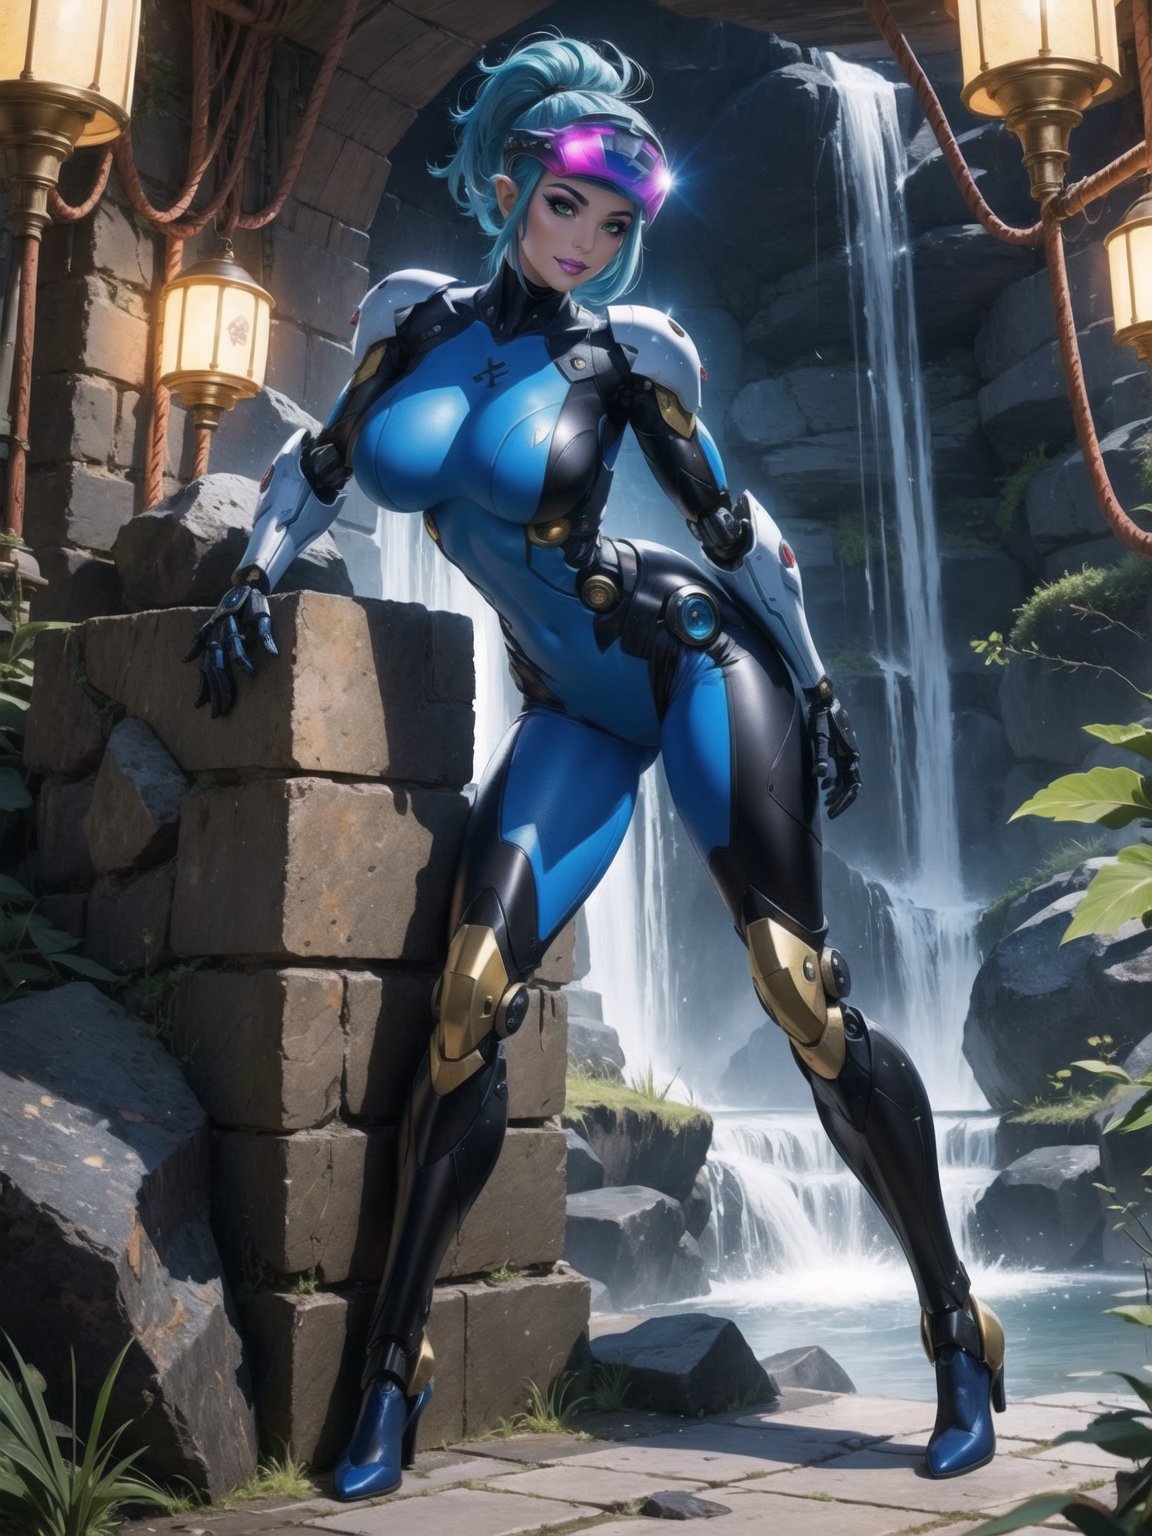 Solo female, ((wearing mecha suit+robotic suit completely white, with blue parts, more yellow lights, suit with attached weapons, gigantic breasts, wearing cybernetic helmet with visor)), mohawk hair, blue hair, messy hair, hair with ponytail, looking directly at the viewer, she is, in a dungeon, with a waterfall, large stone altars, stone structures, machines, robots, large altars of ancient gods, figurines, Super Metroid, ultra technological, Zelda, Final Fantasy, worldofwarcraft, UHD, best possible quality, ultra detailed, best possible resolution, Unreal Engine 5, professional photography, she is ((sensual pose with interaction and leaning on anything+object+on something+leaning against)), better_hands, (full body), More detail